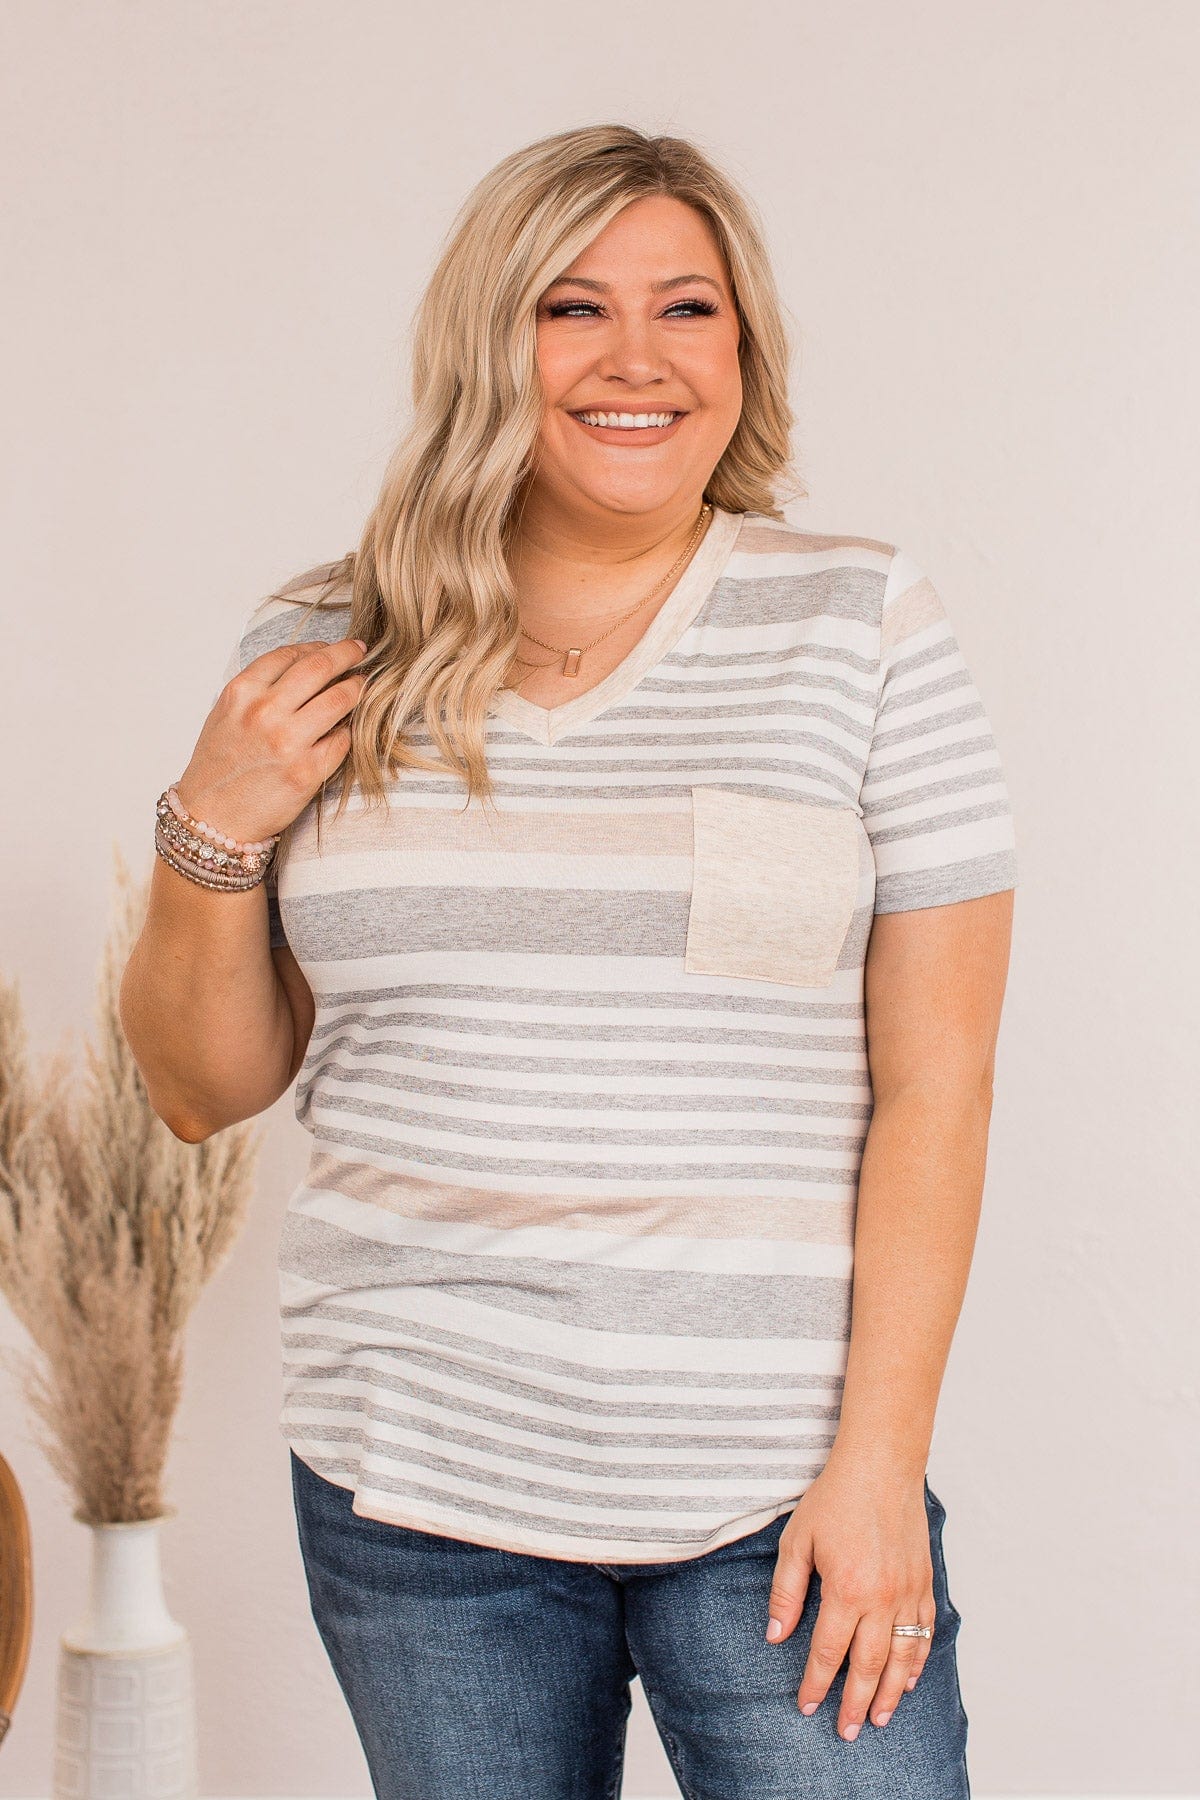 Meant For You Striped Top- Heather Gray